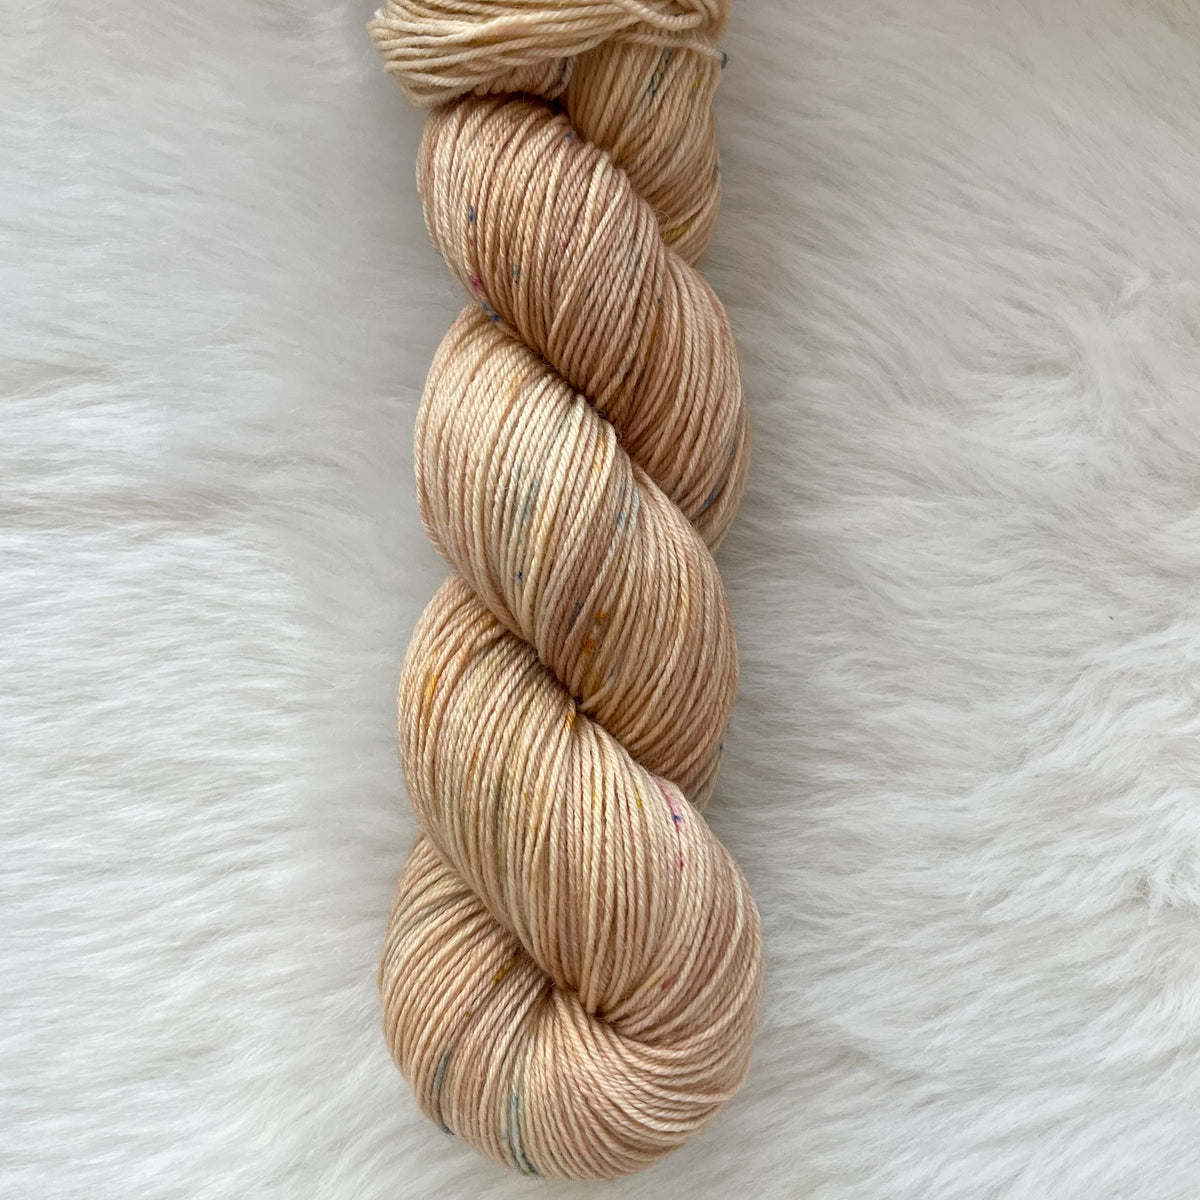 OLD BROWN   -Ready to Ship - BFL Sock- Hand Dyed Yarn Skein